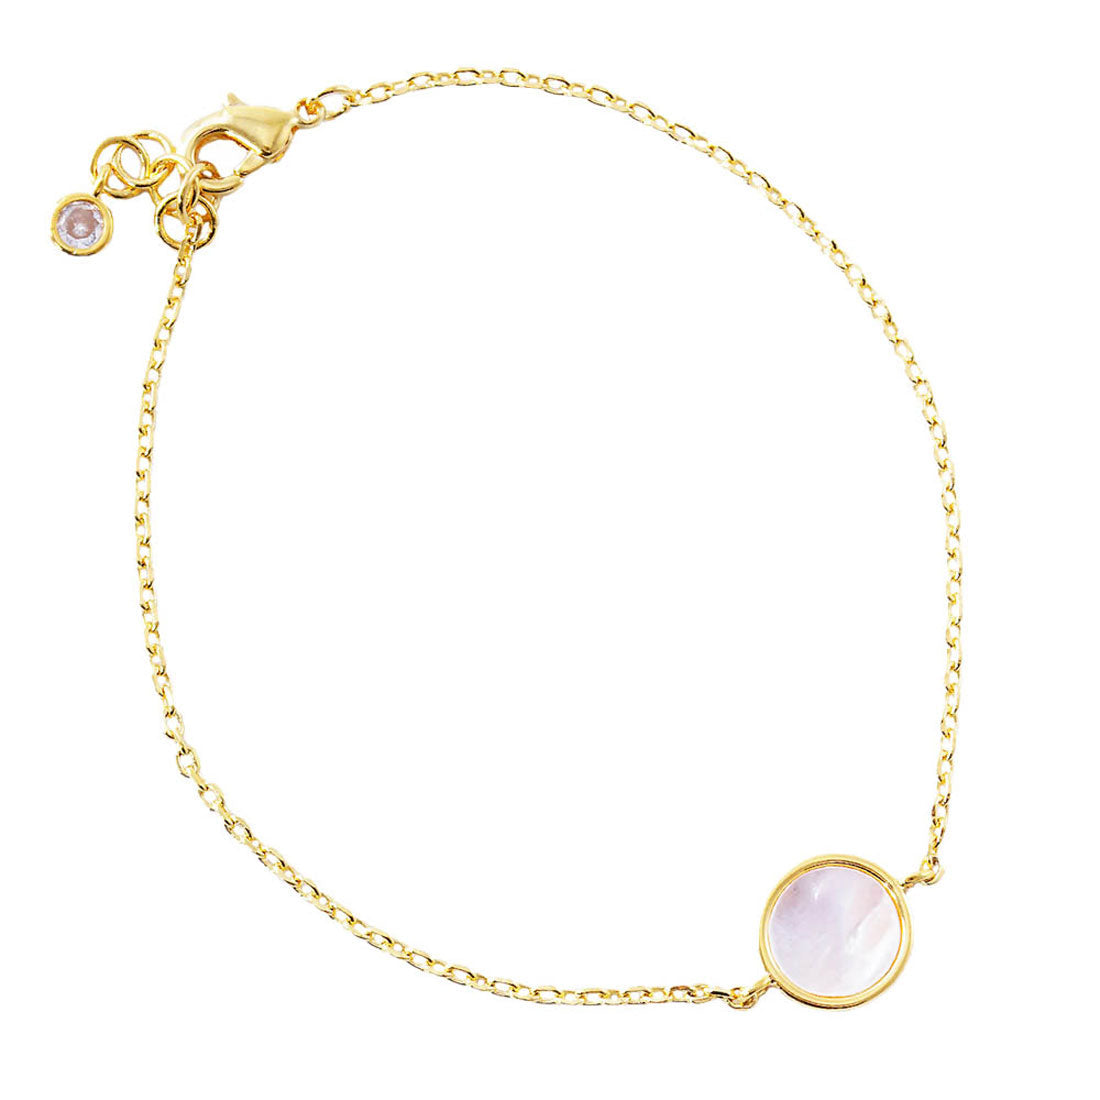 Gold Solid Gold Dipped Mother of Pearl Round Charm Bracelet, subtle sleek style, just what you need to update your wardrobe. Bring a little of the ocean to your daily look. Jewelry that fits your lifestyle. Perfect Birthday Gift, Anniversary Gift, Mother's Day Gift, Mom Gift, Thank you Gift, Just Because Gift, Daily Wear.